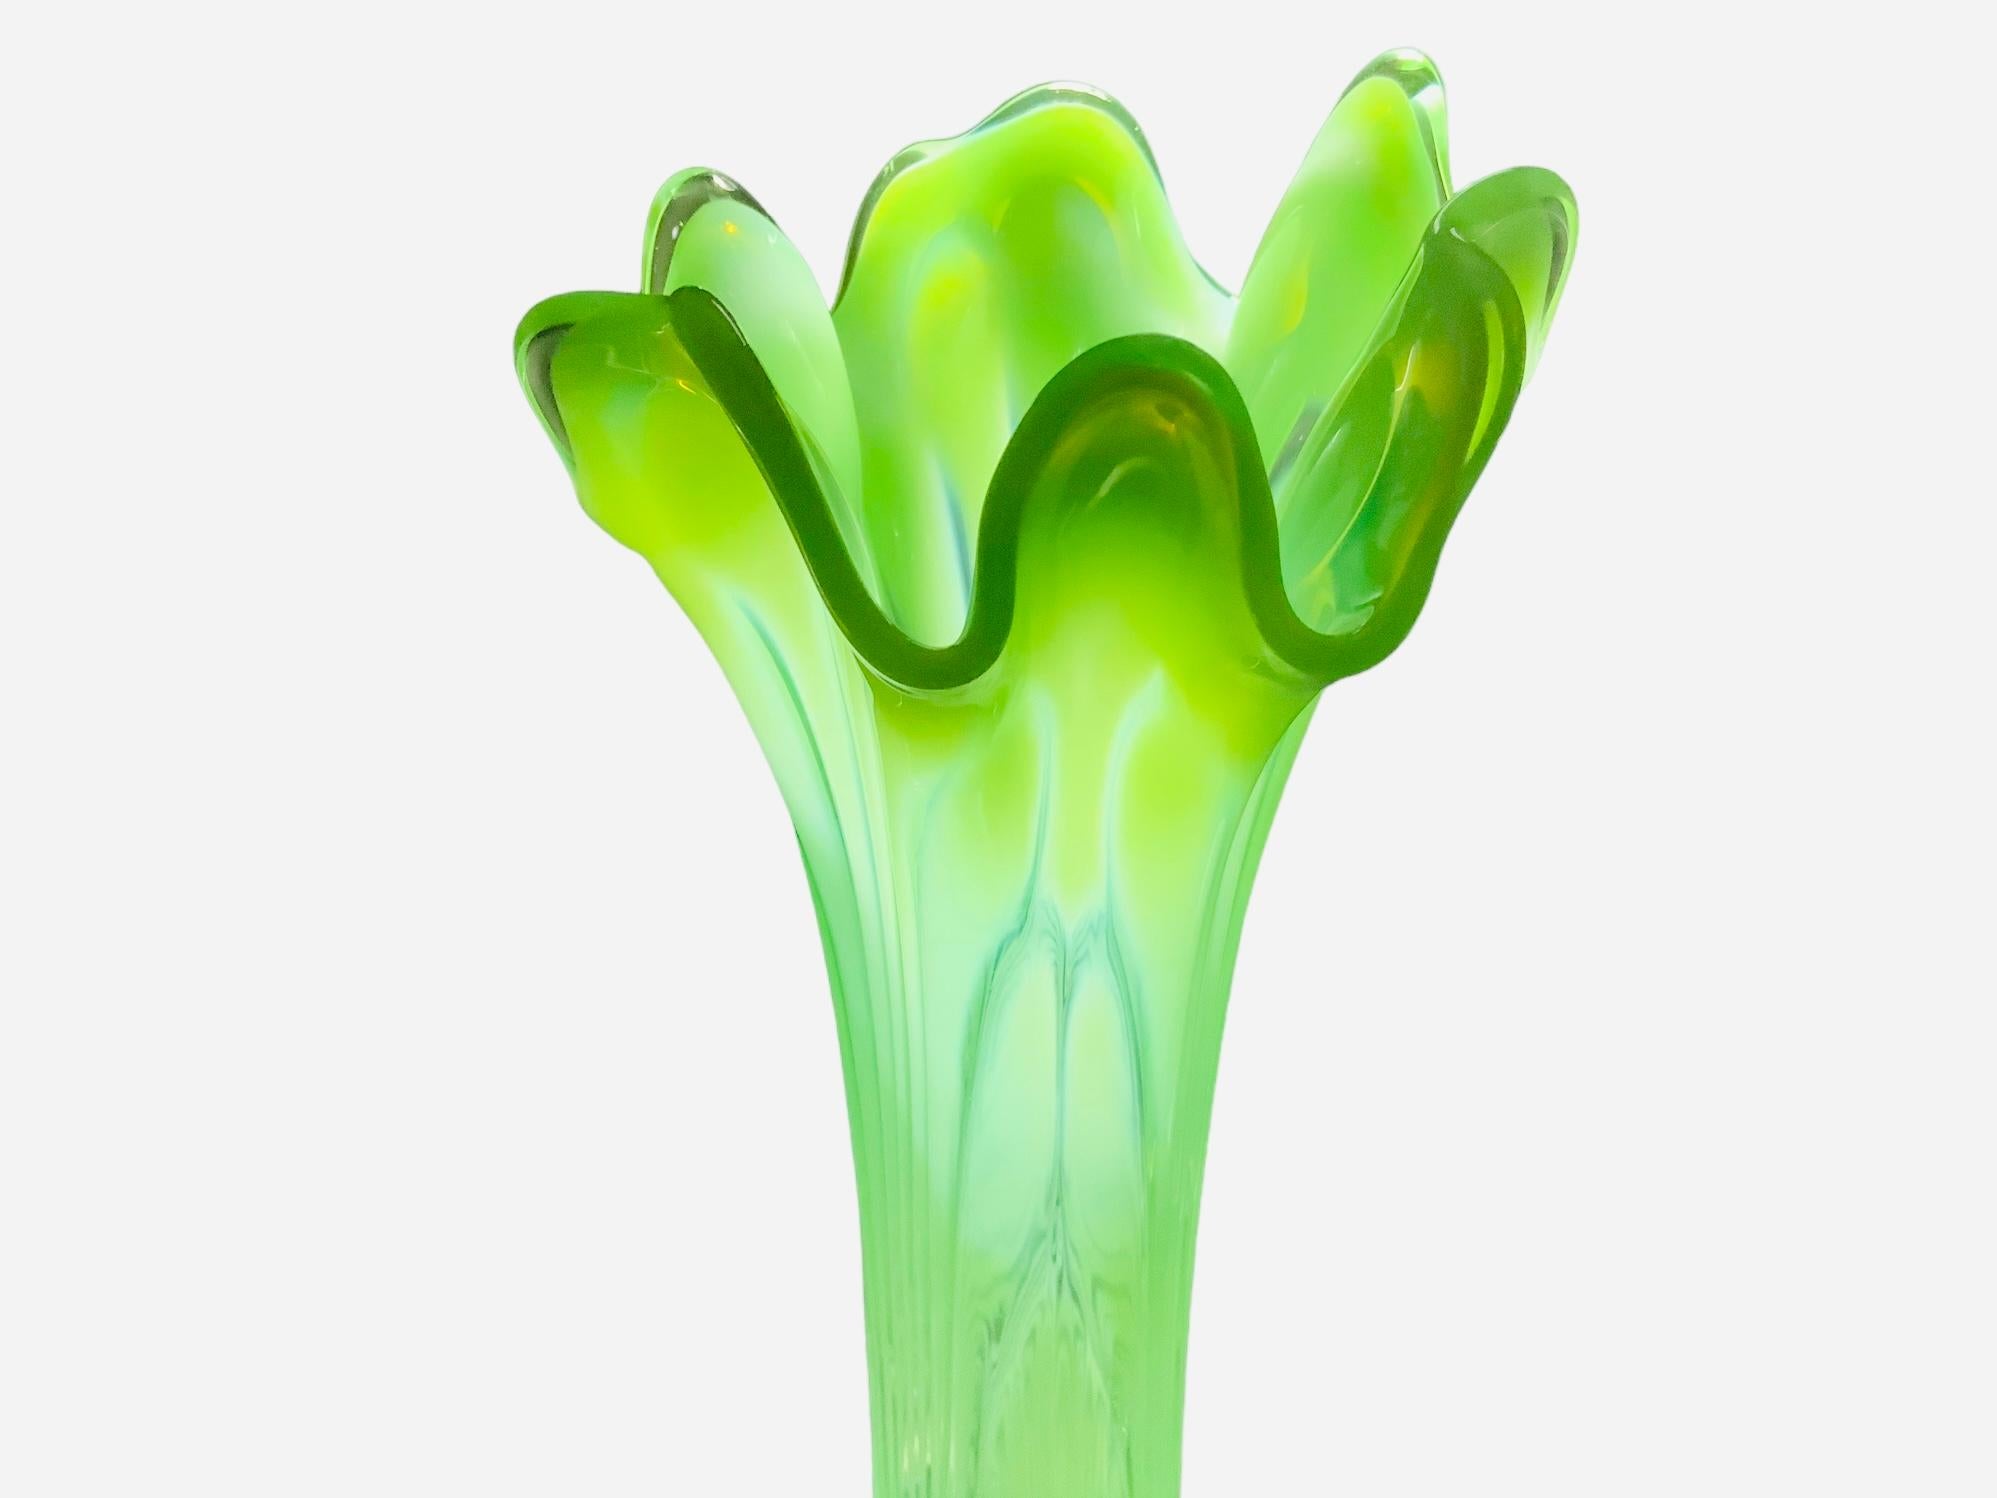 This is a large Art Glass flower vase. It depicts a transparent yellow and light apple green glass flower vase with high waves upper border. The whole vase is adorned with reeded bands that match the tips of the waves.